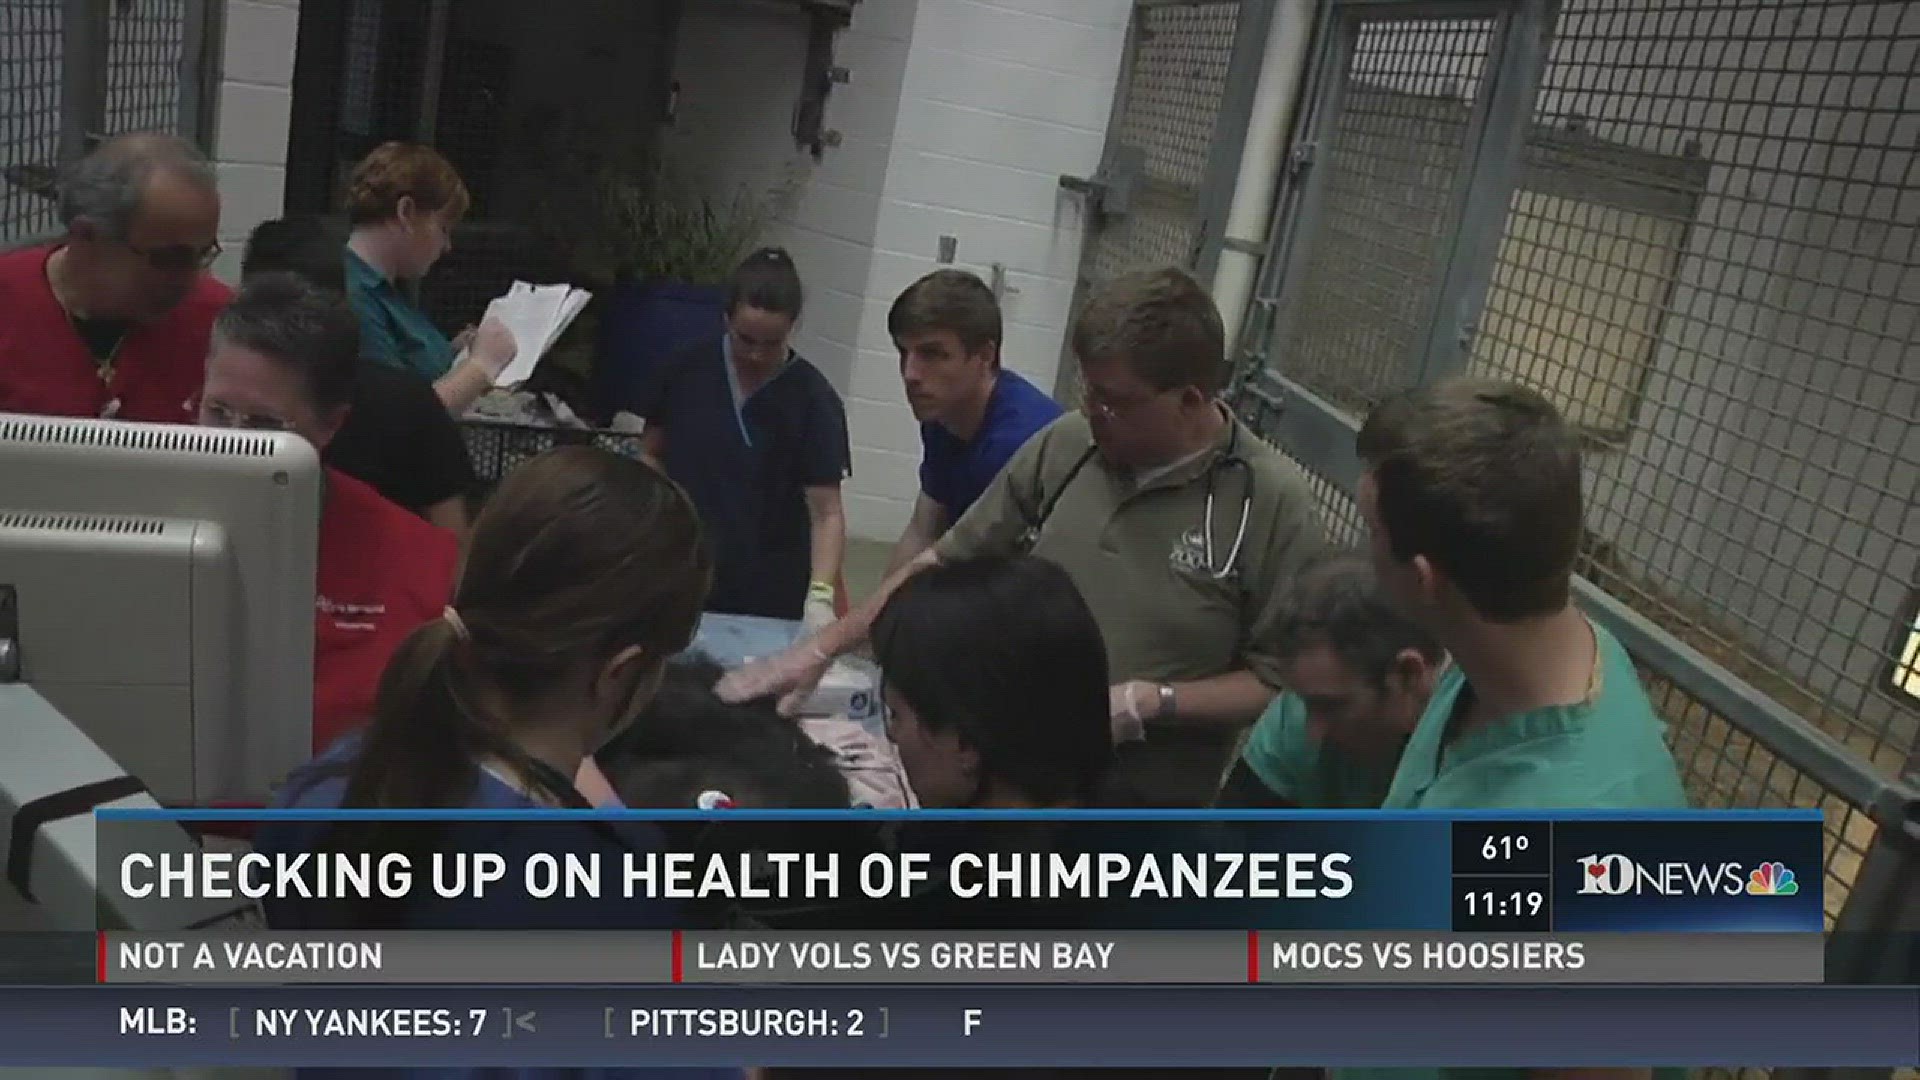 Two chimpanzees in Chattanooga received an EKG exam.